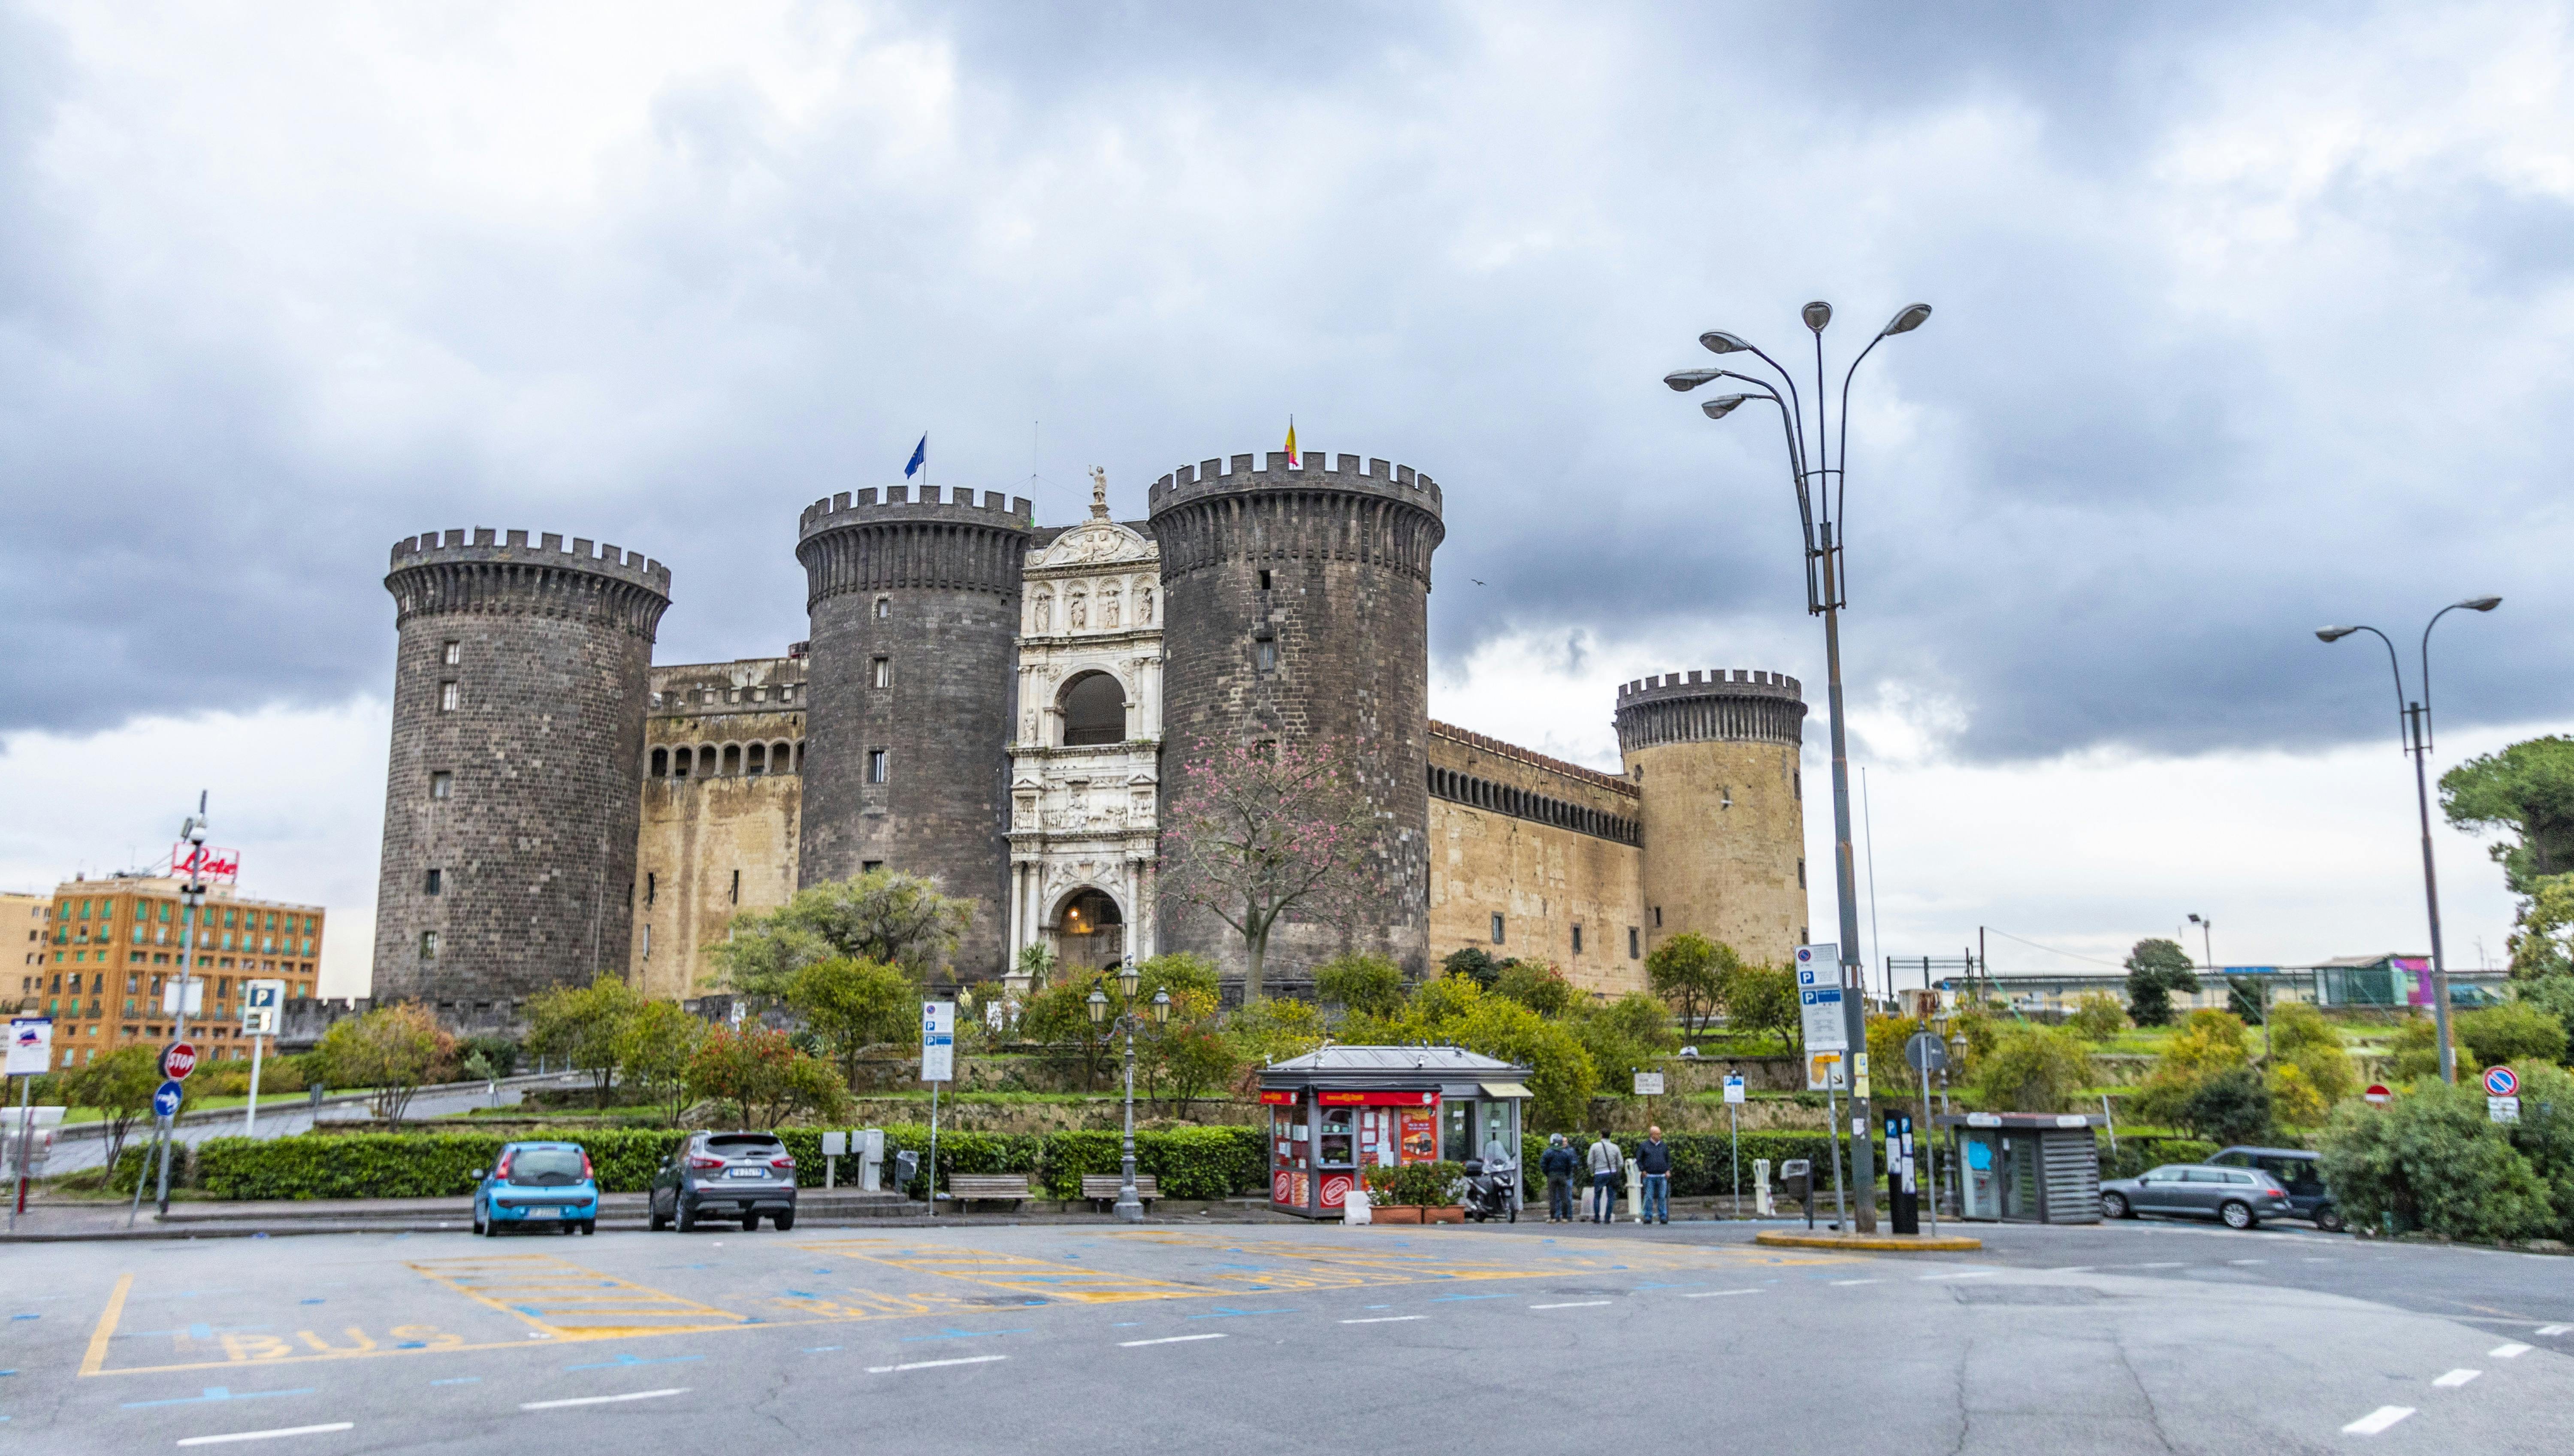 Explore Naples' Instagrammable spots with a local